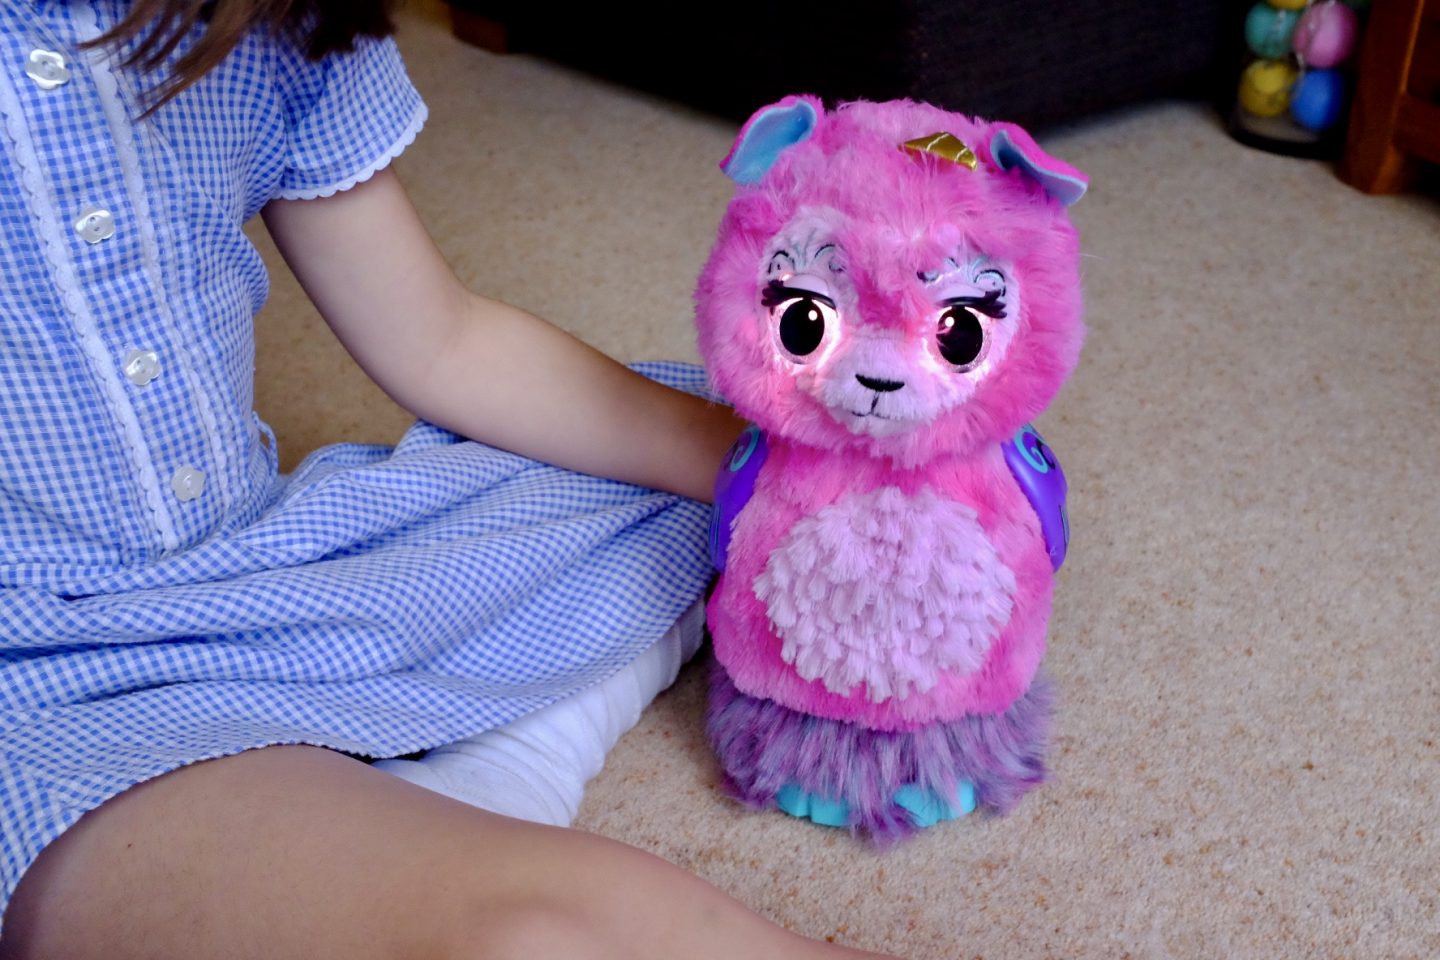 Hatchimals WOW - REVIEW - A Llalacorn Whose Neck really GROWS Tall